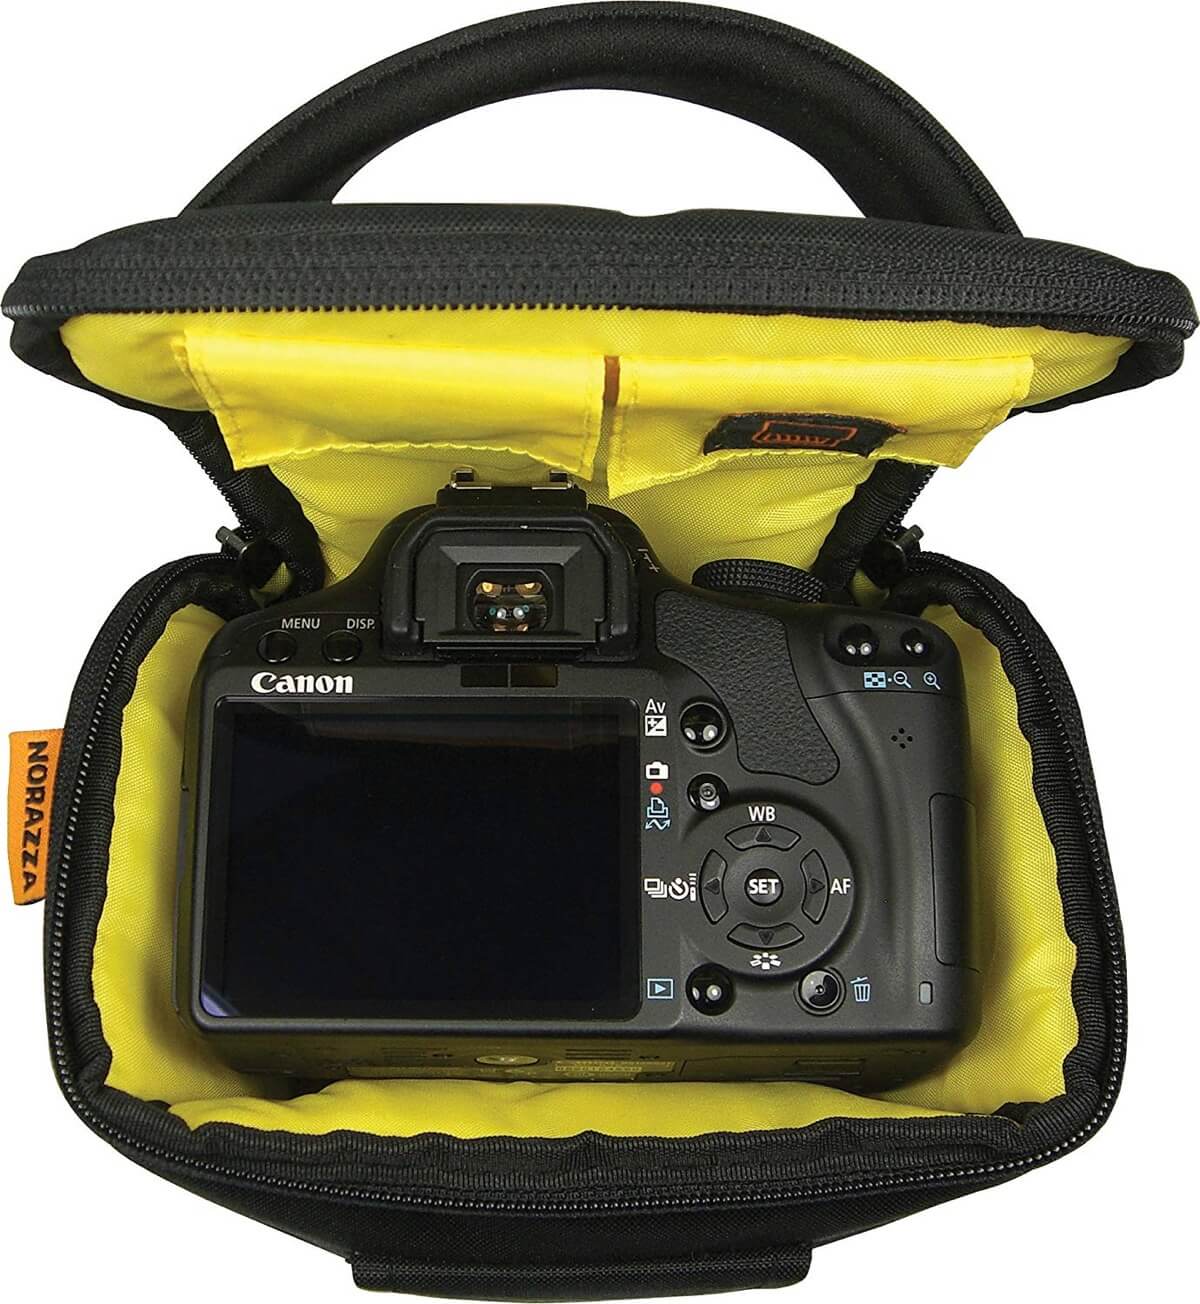 45 Great Camera Bags For Every Budget The Photo Argus